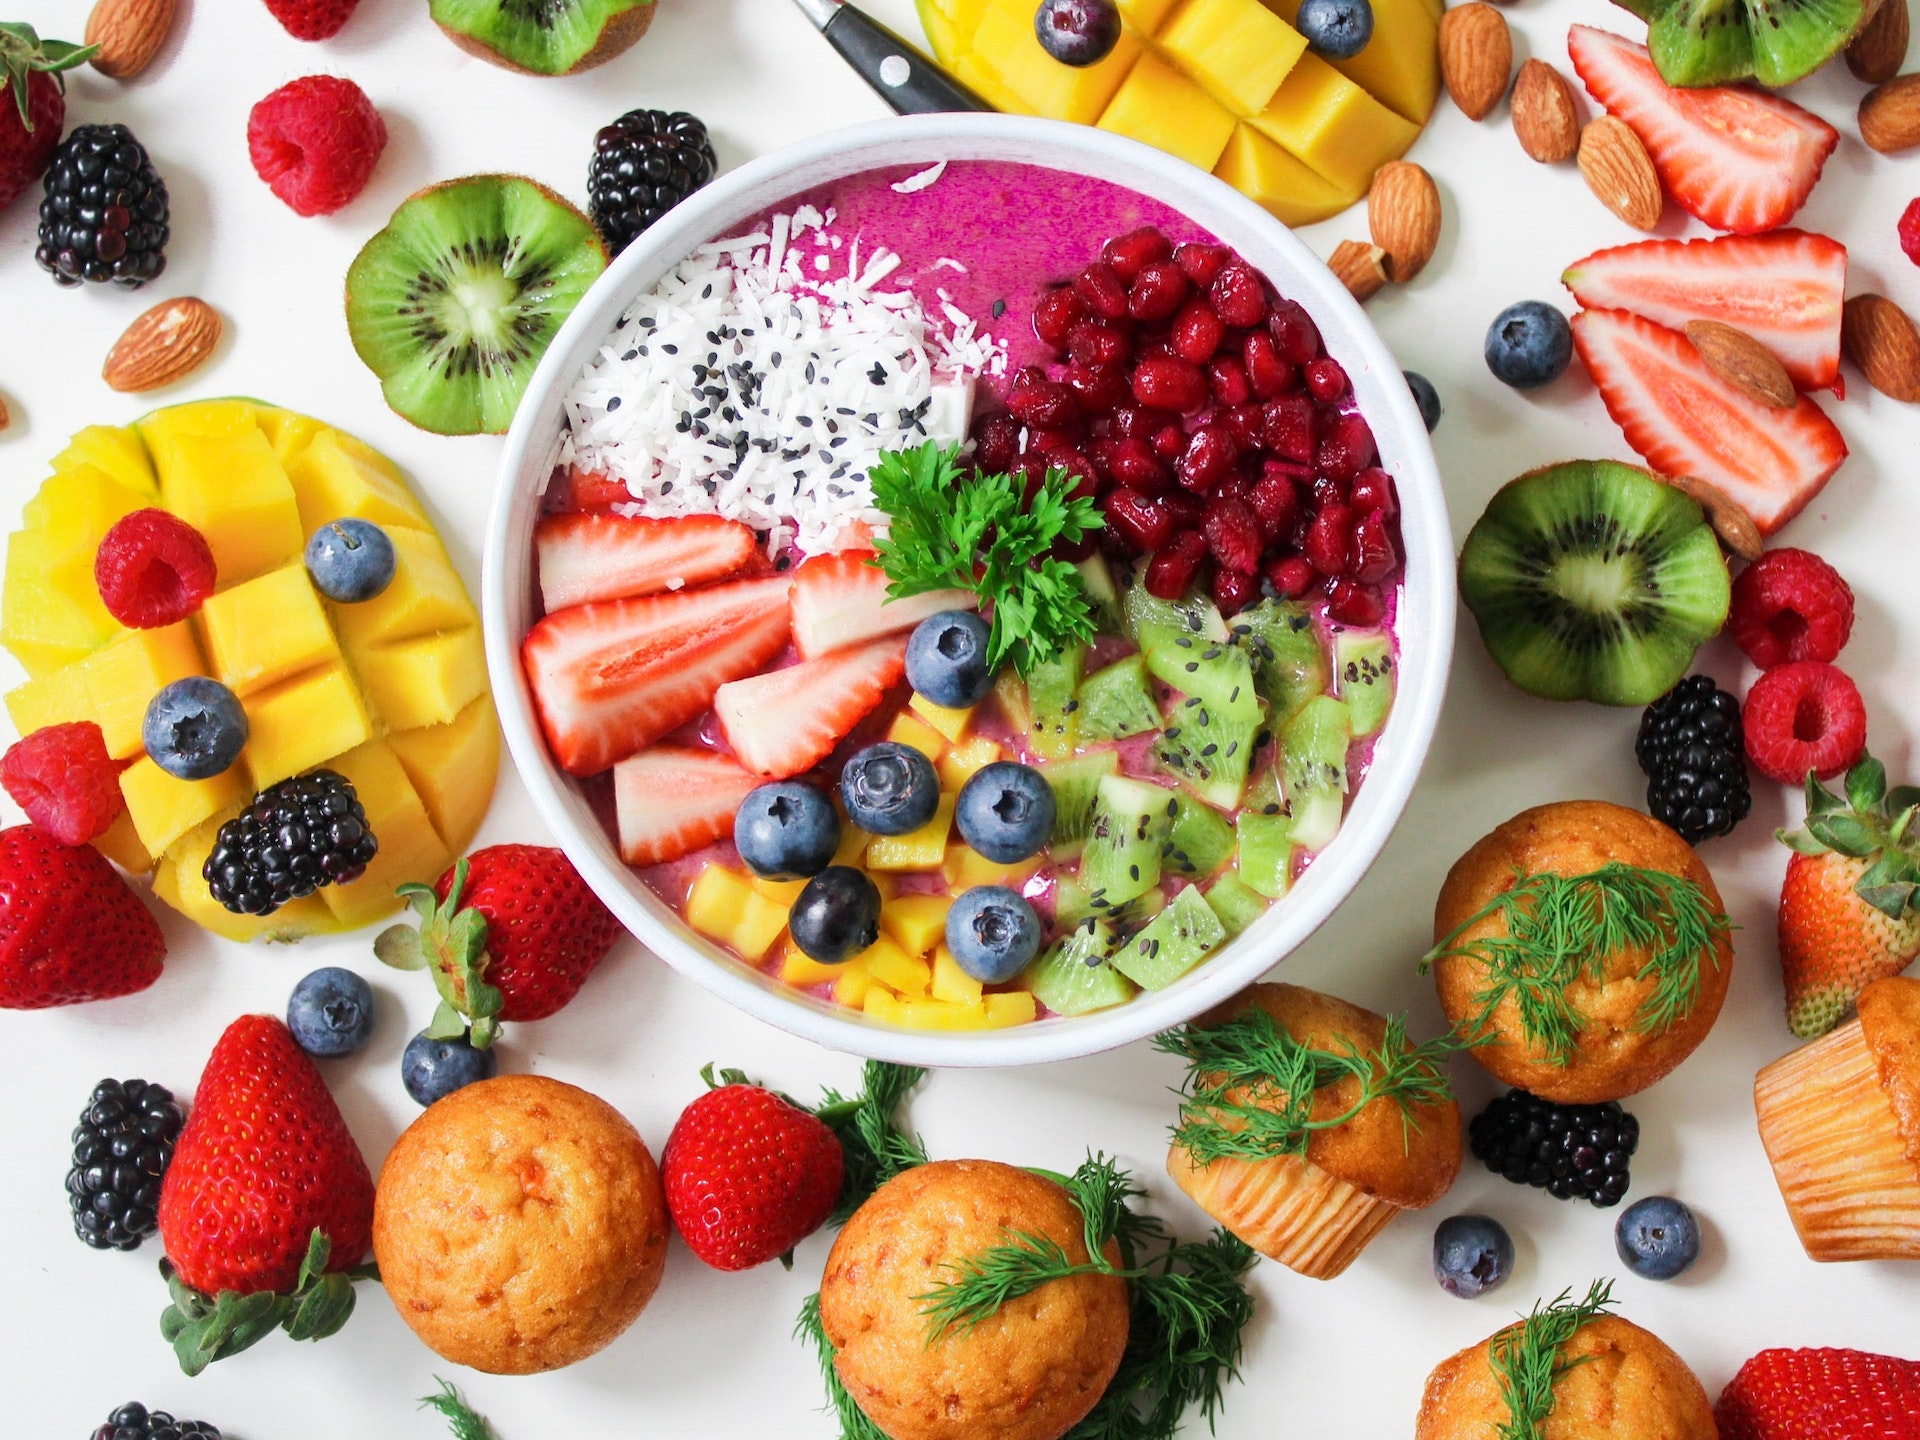 Table with breakfast foods and smoothie bowl